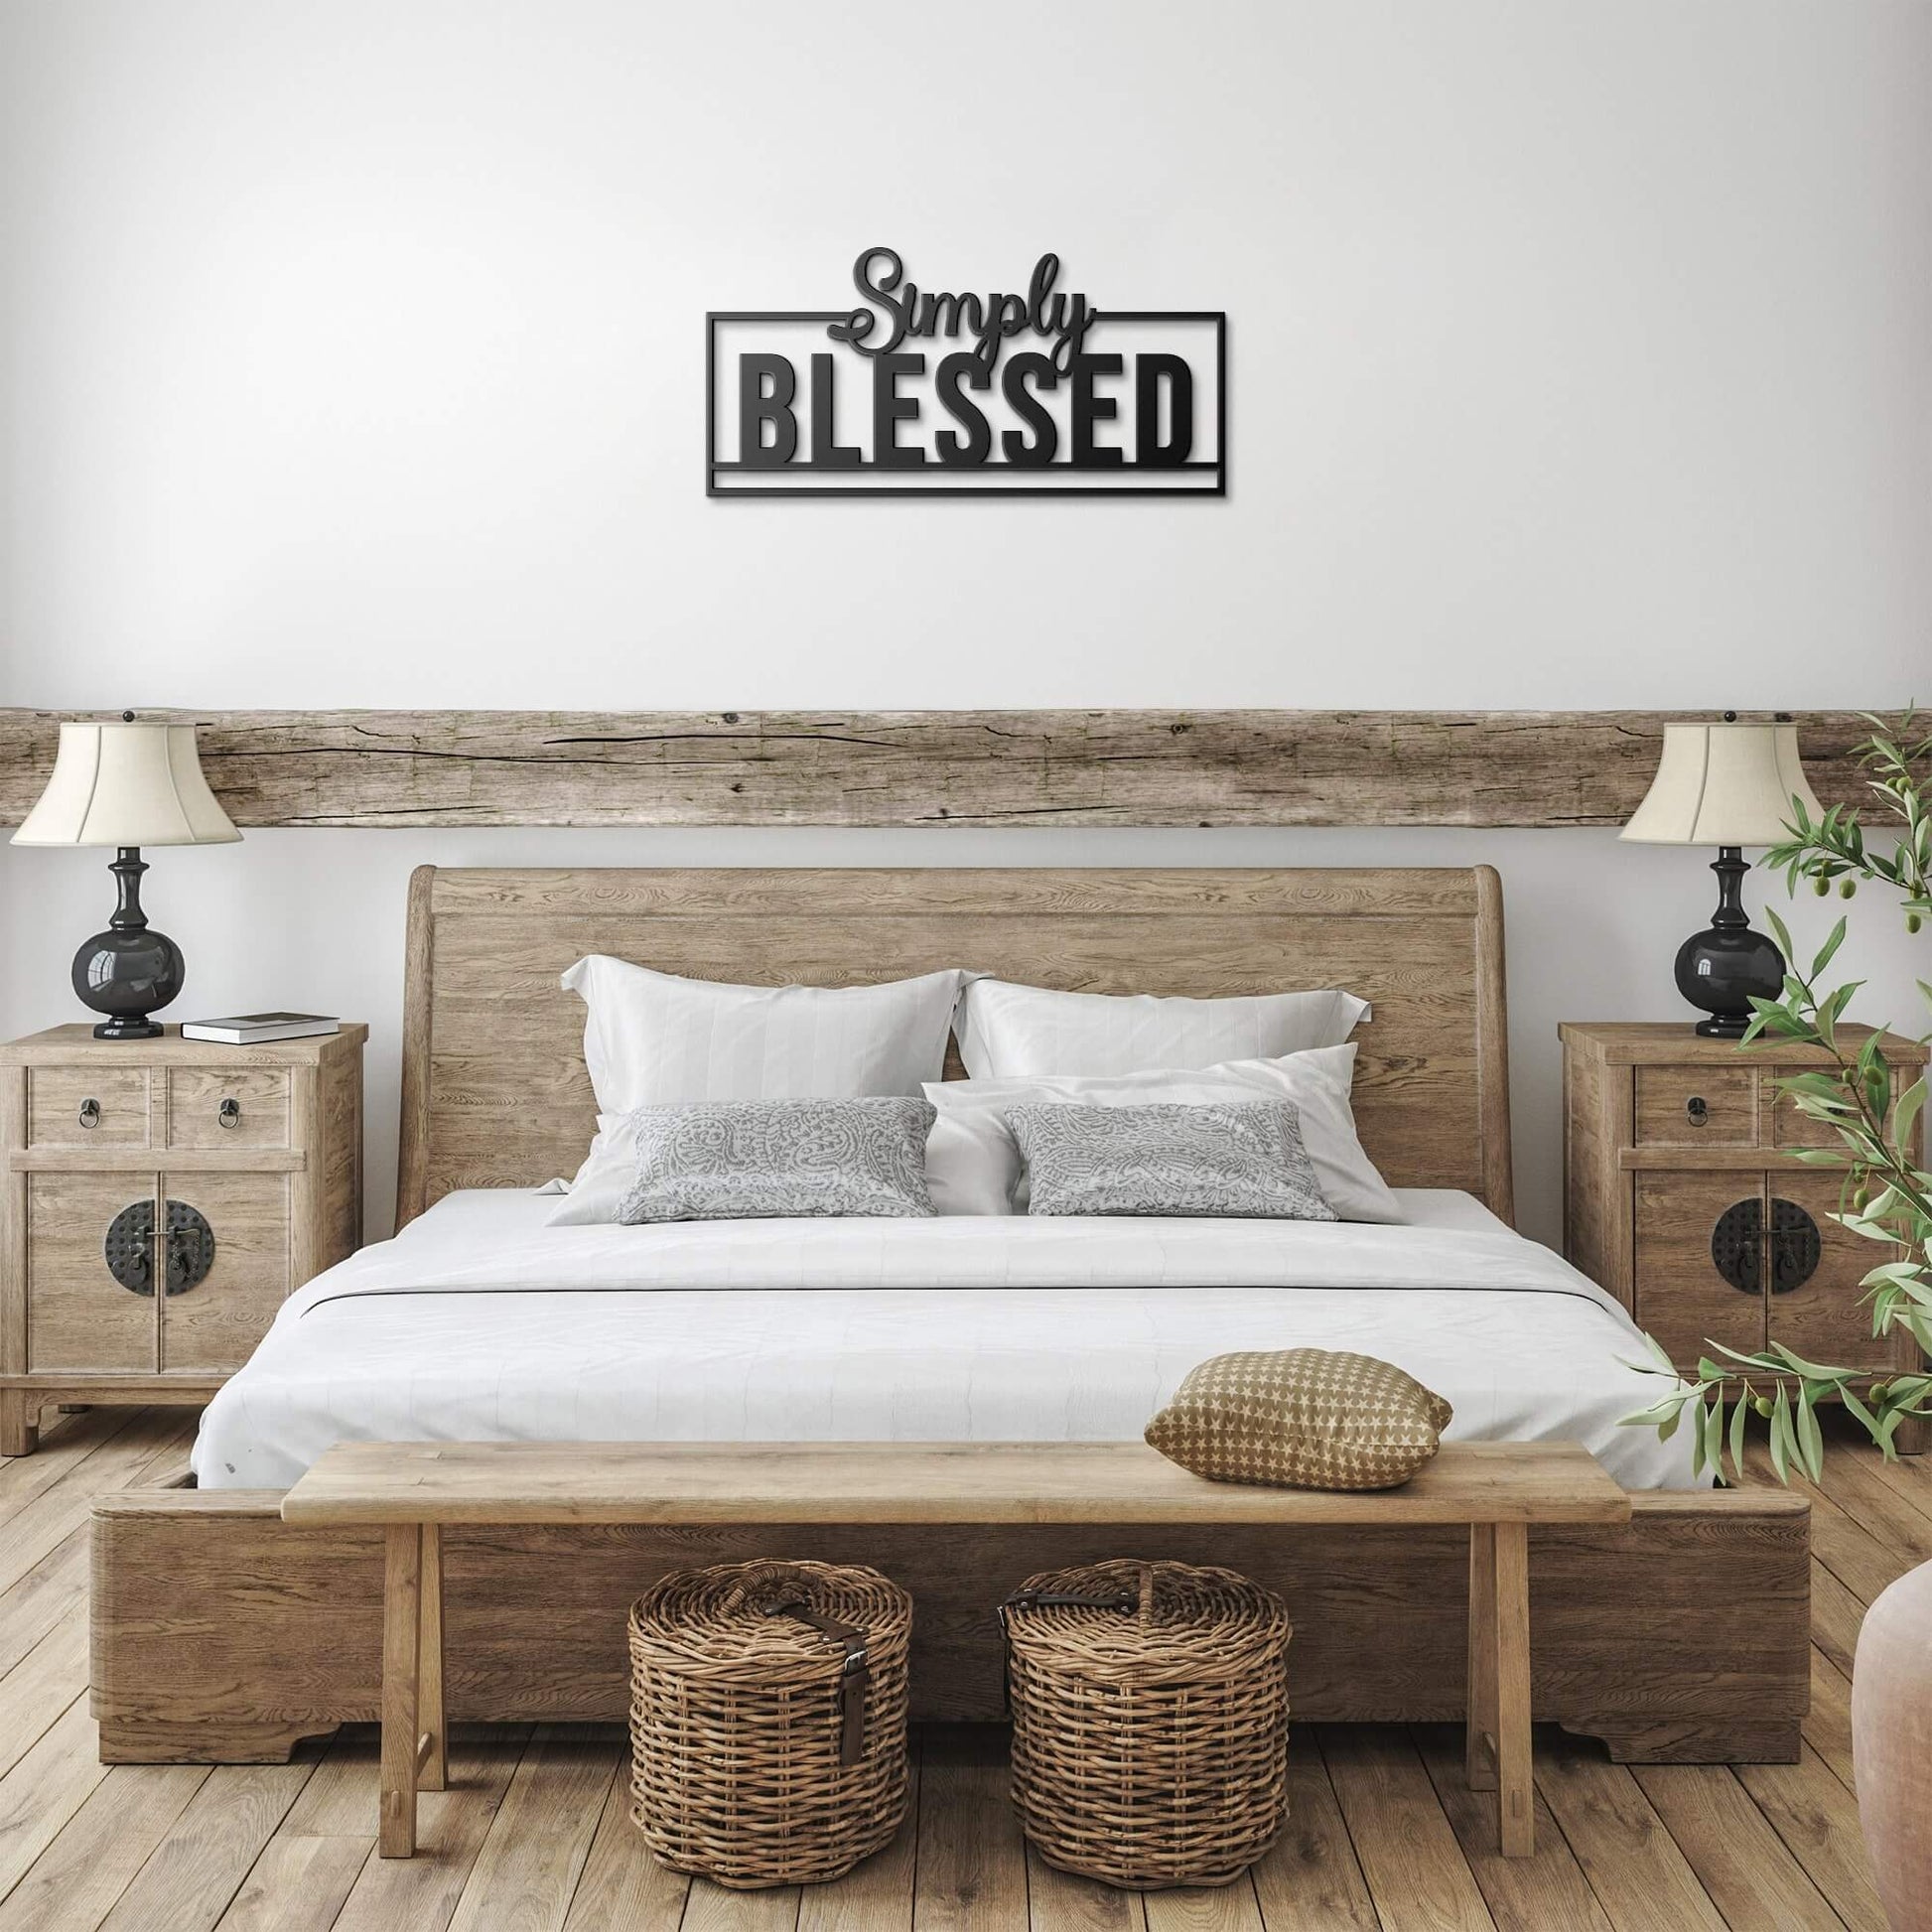 Simply Blessed Metal Sign 1 - Christian Metal Wall Art - Religious Metal Wall Decor